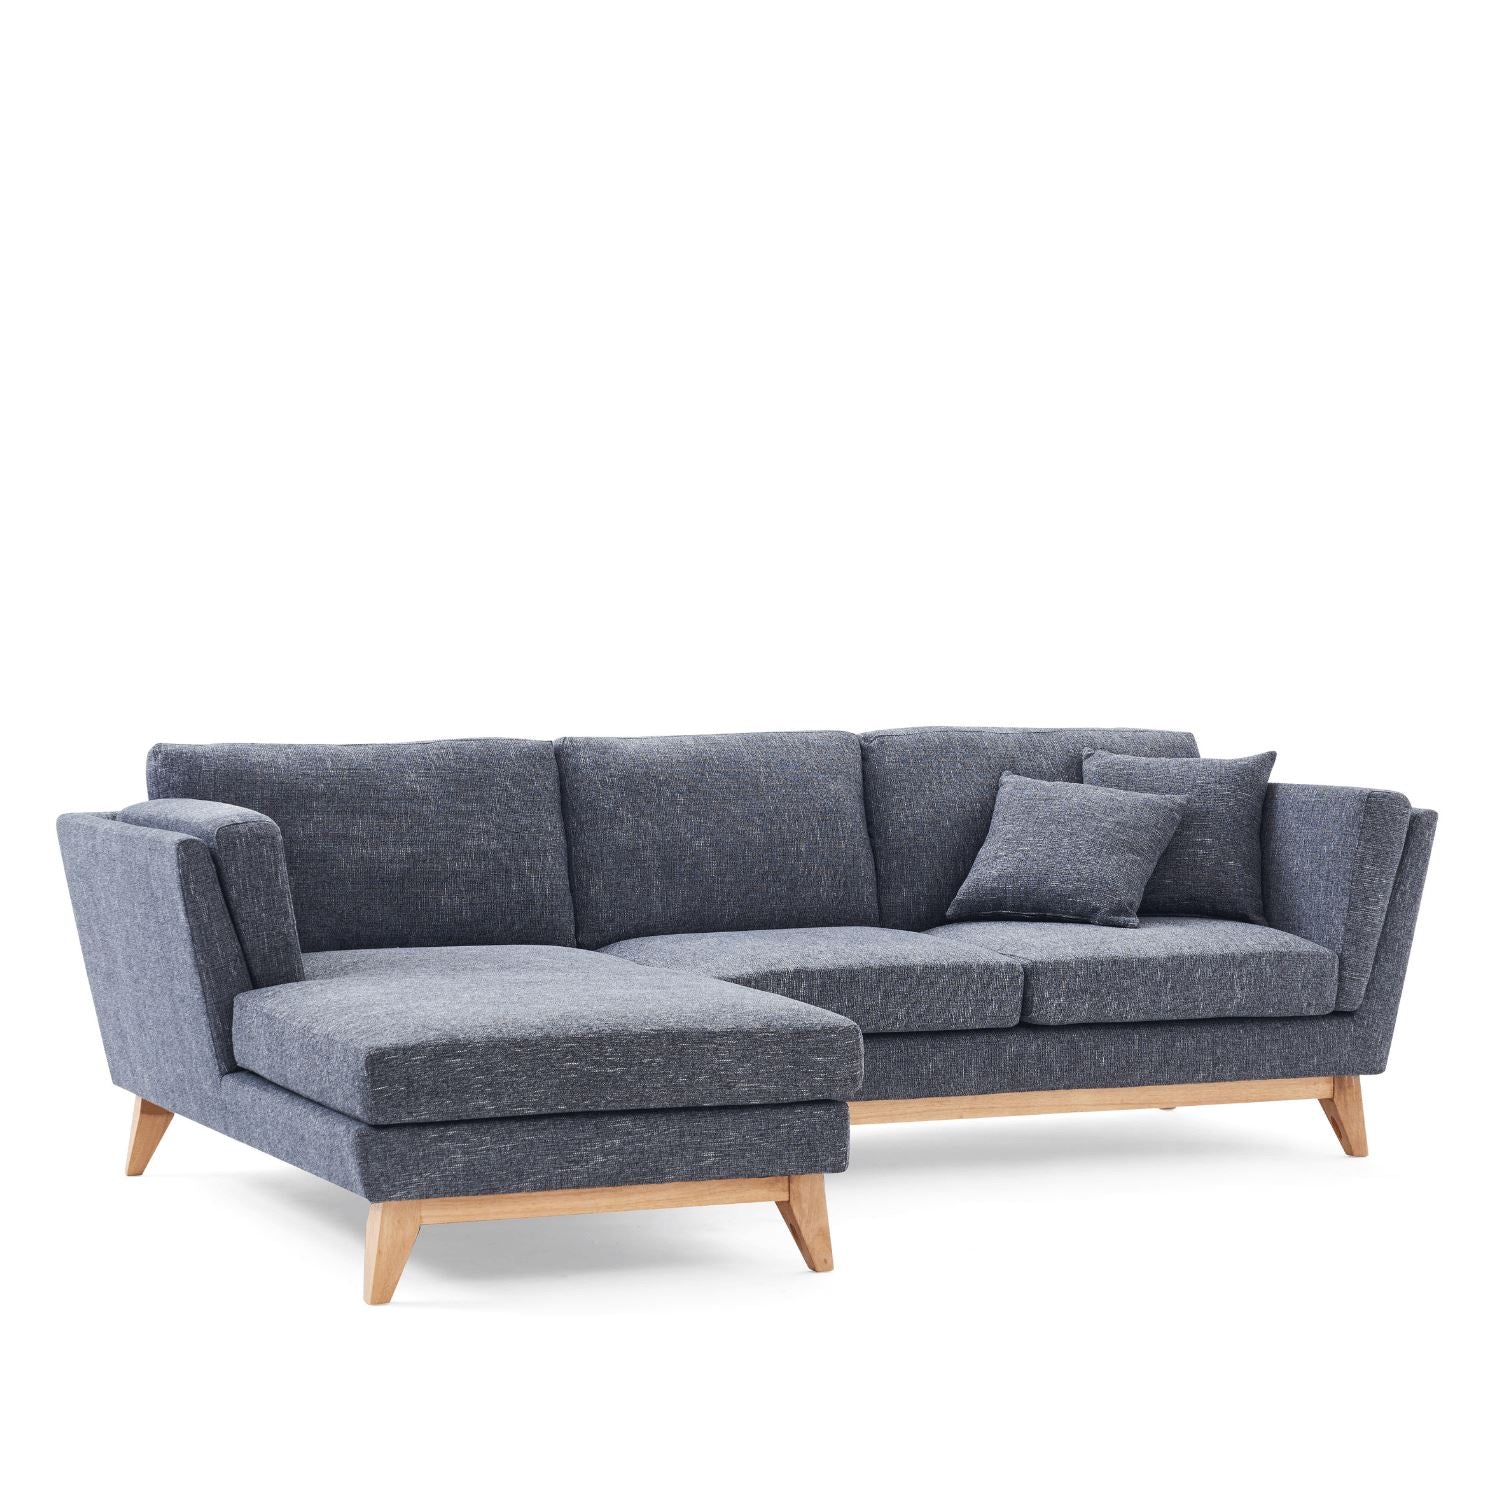 ValMinimal Valyou Furniture Sectional |